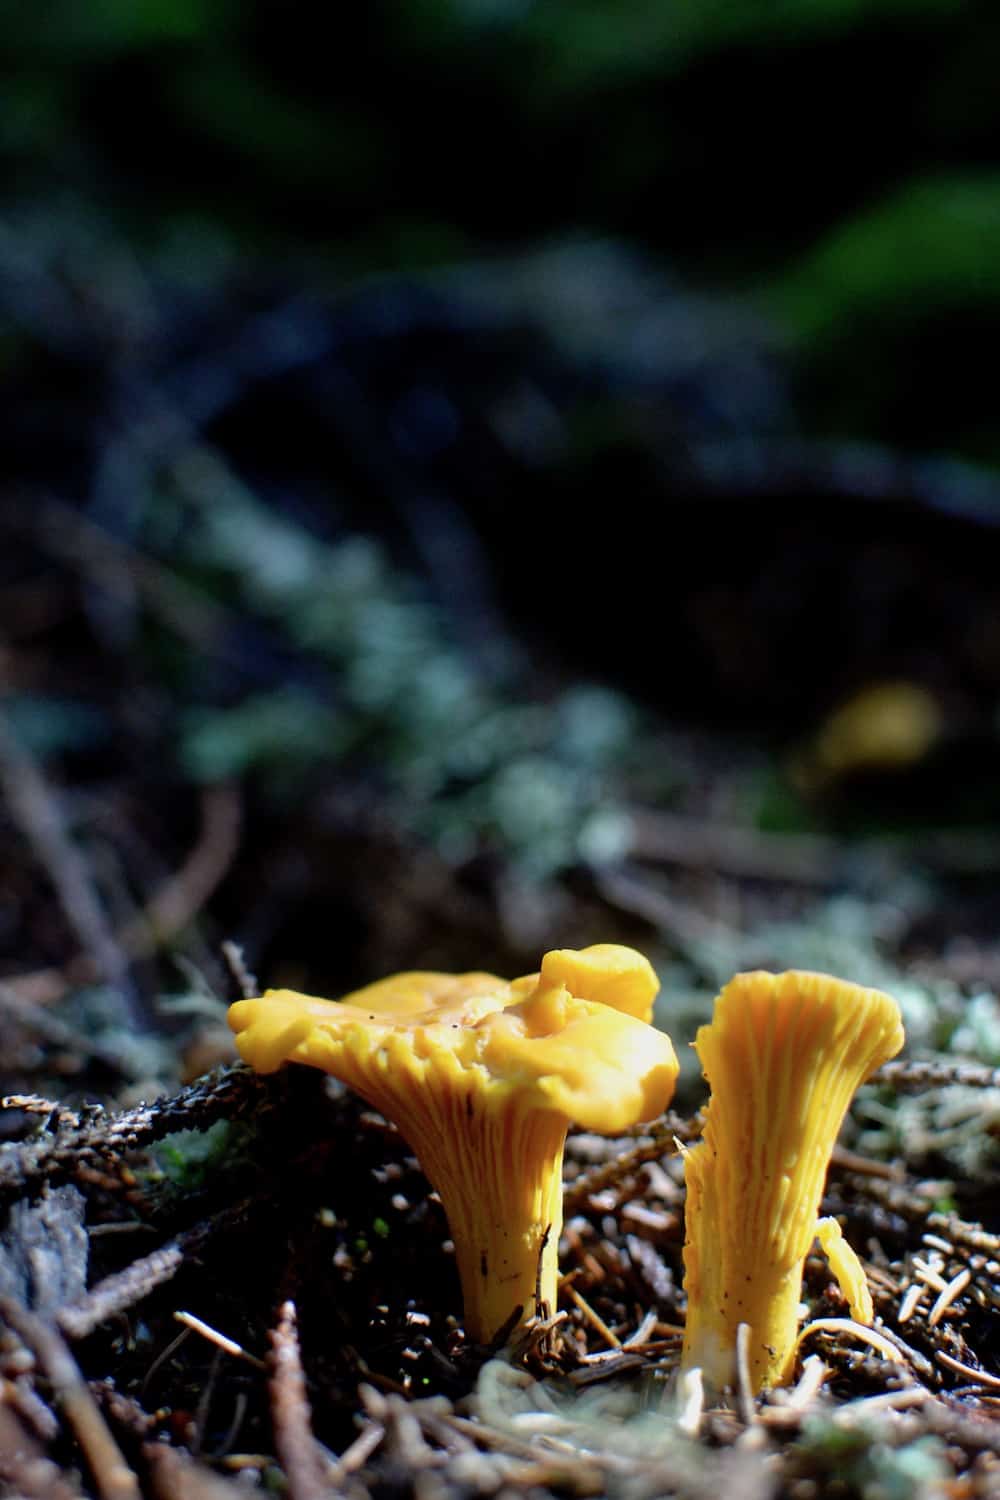 Bright yellow chanterelle mushrooms growing in the woods